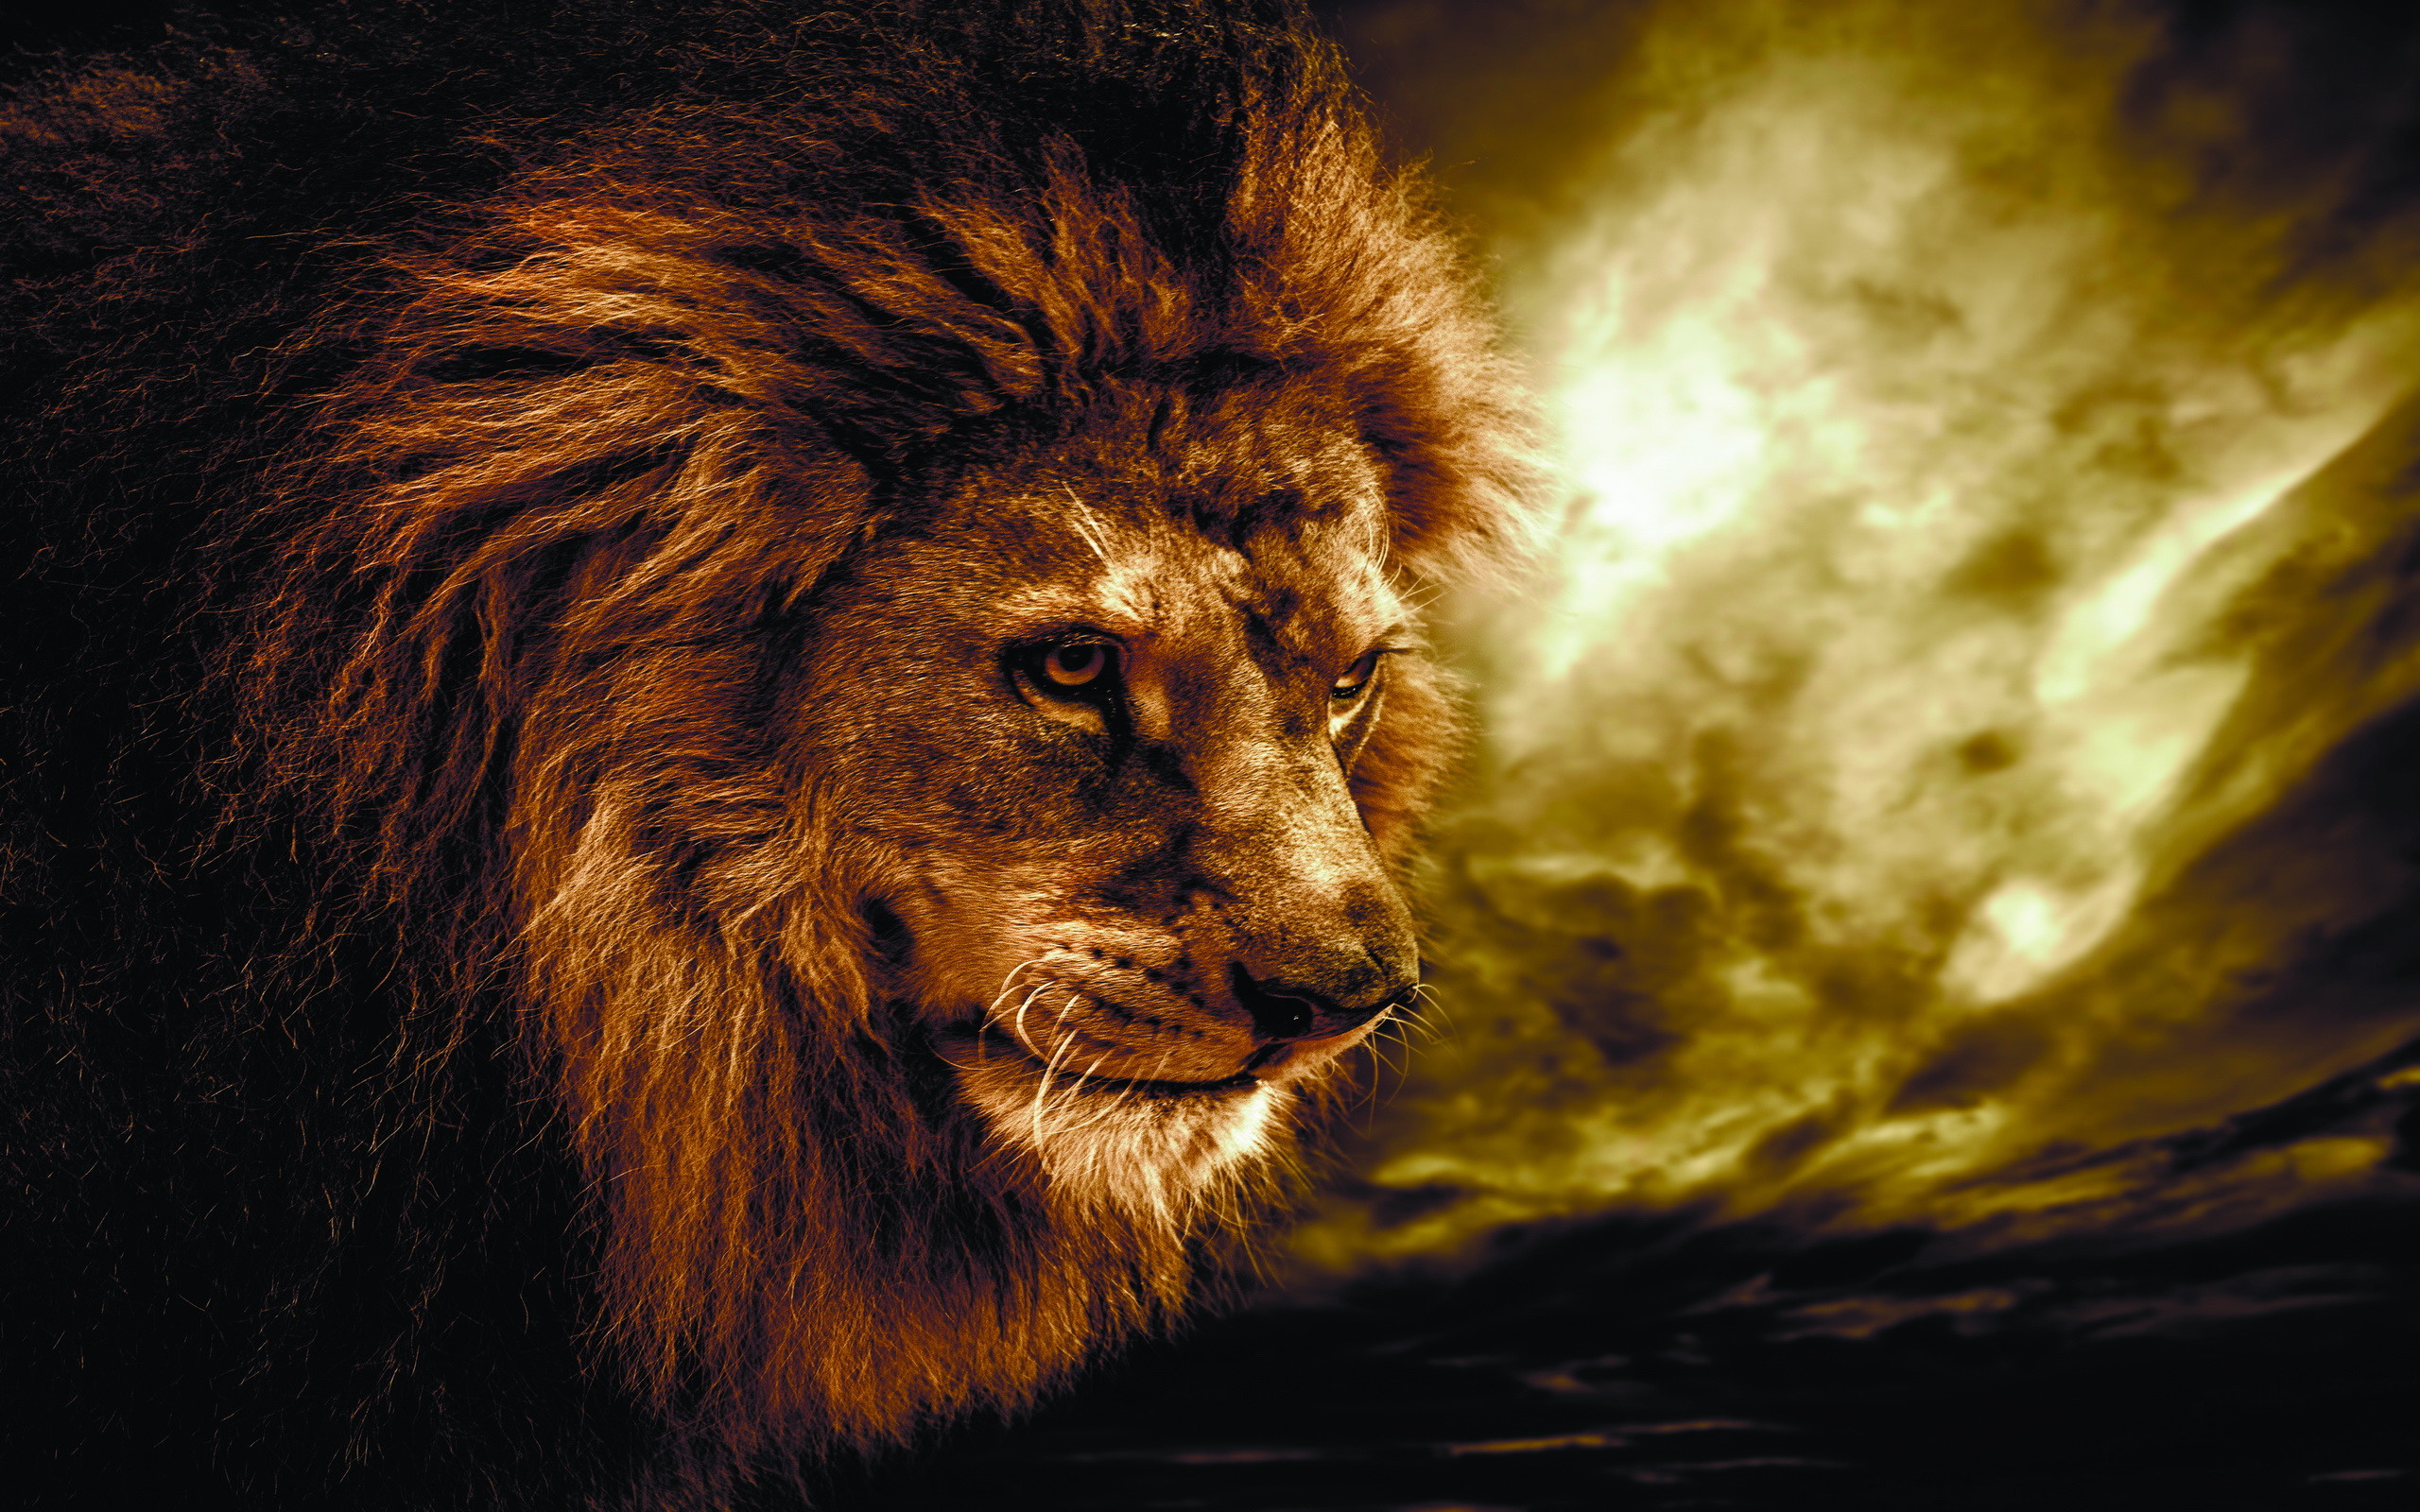 2560x1600 LION, IPHONE WALLPAPER BACKGROUND | IPHONE WALLPAPER / BACKGROUNDS .